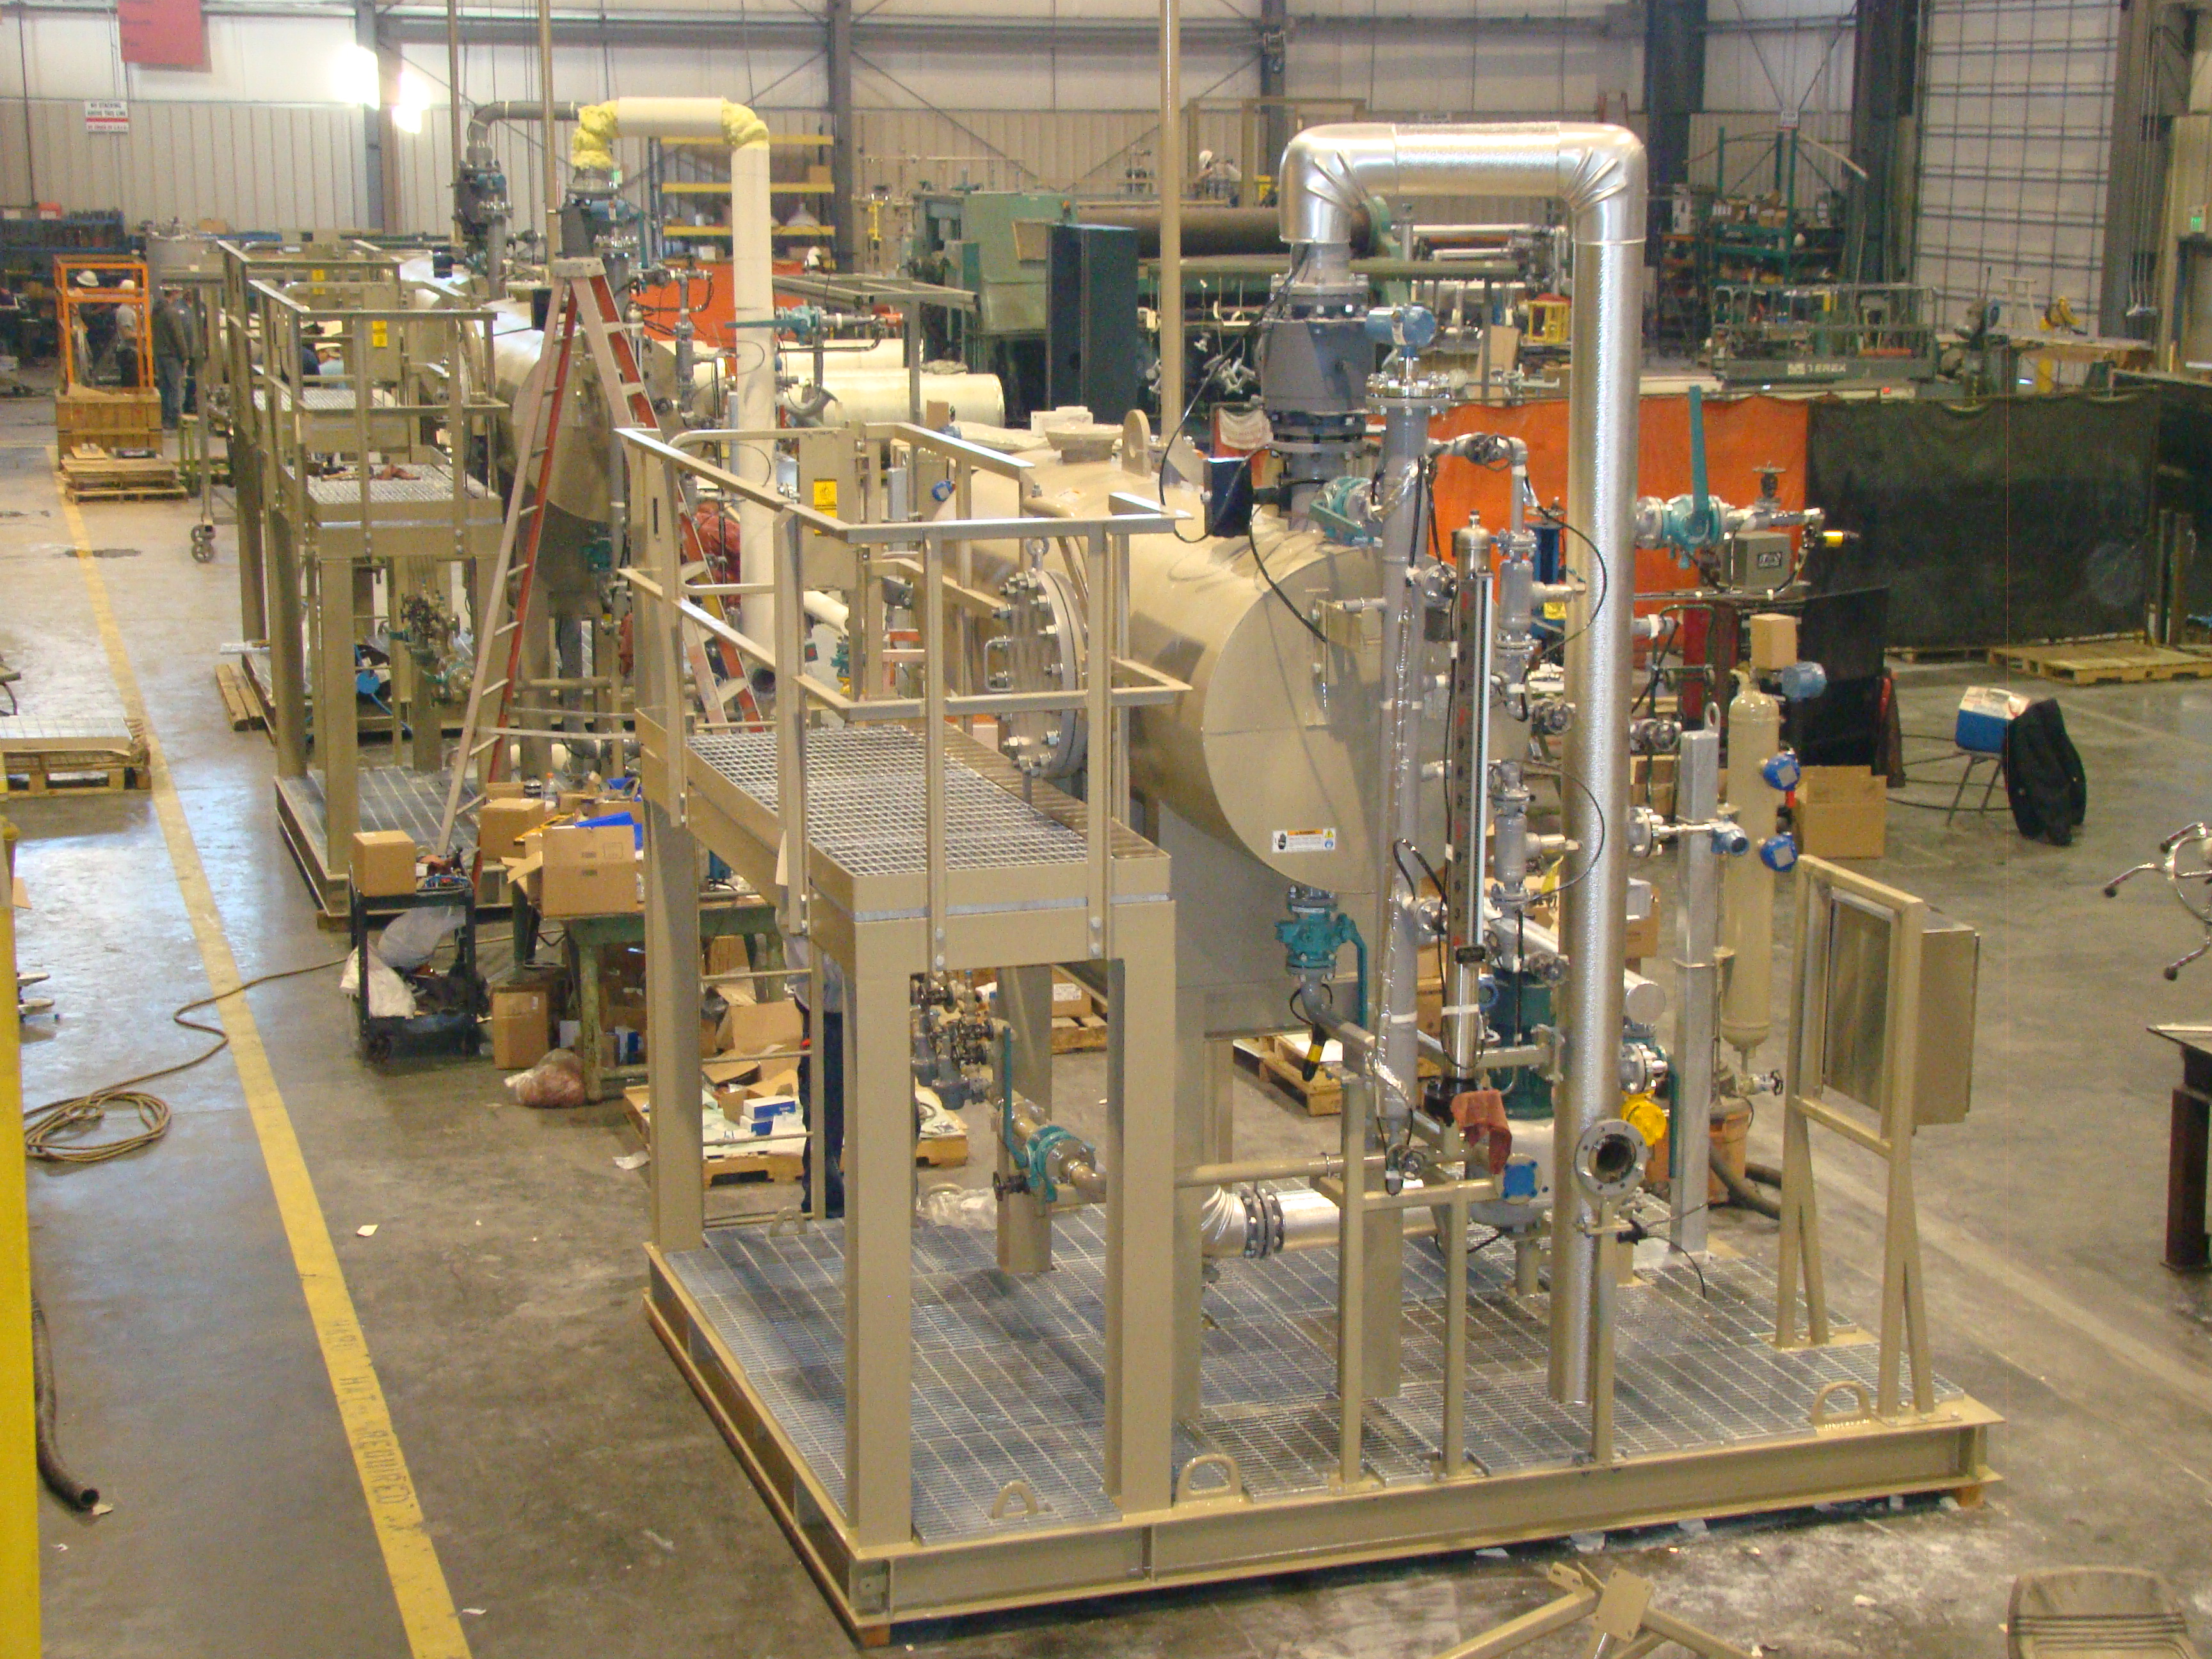 Process Skids - Structural / Piping / Pressure Vessel Fabrication